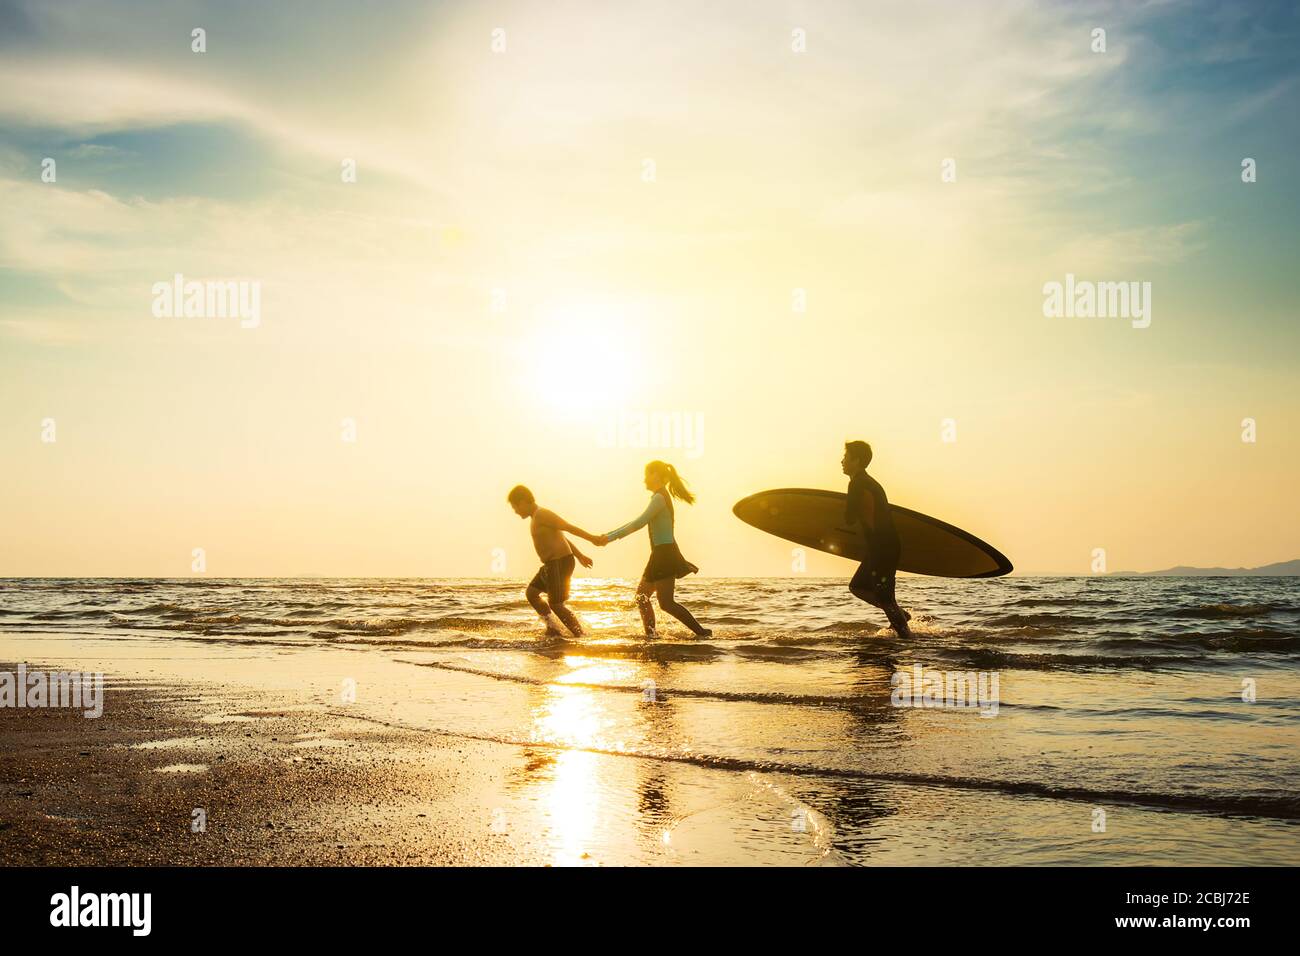 Outdoor sport activity friendship concept : Silhouette of group of young joyful surfer friend running into the sea with surf boards on sunset beach Stock Photo